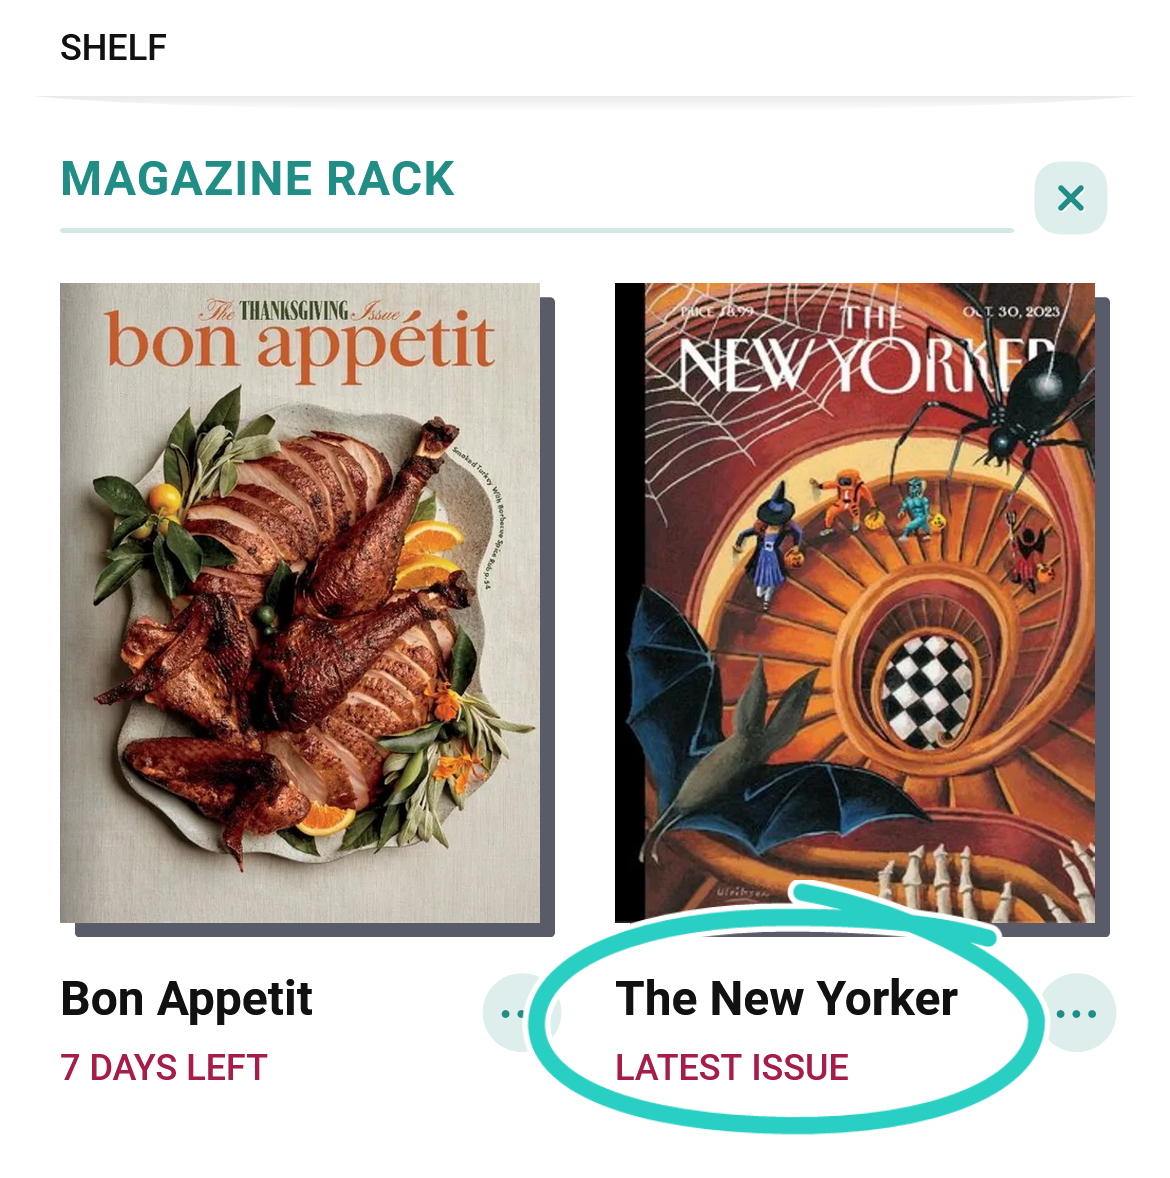 Magazine Rack with the latest issue label, under the magazine name and cover image, circled